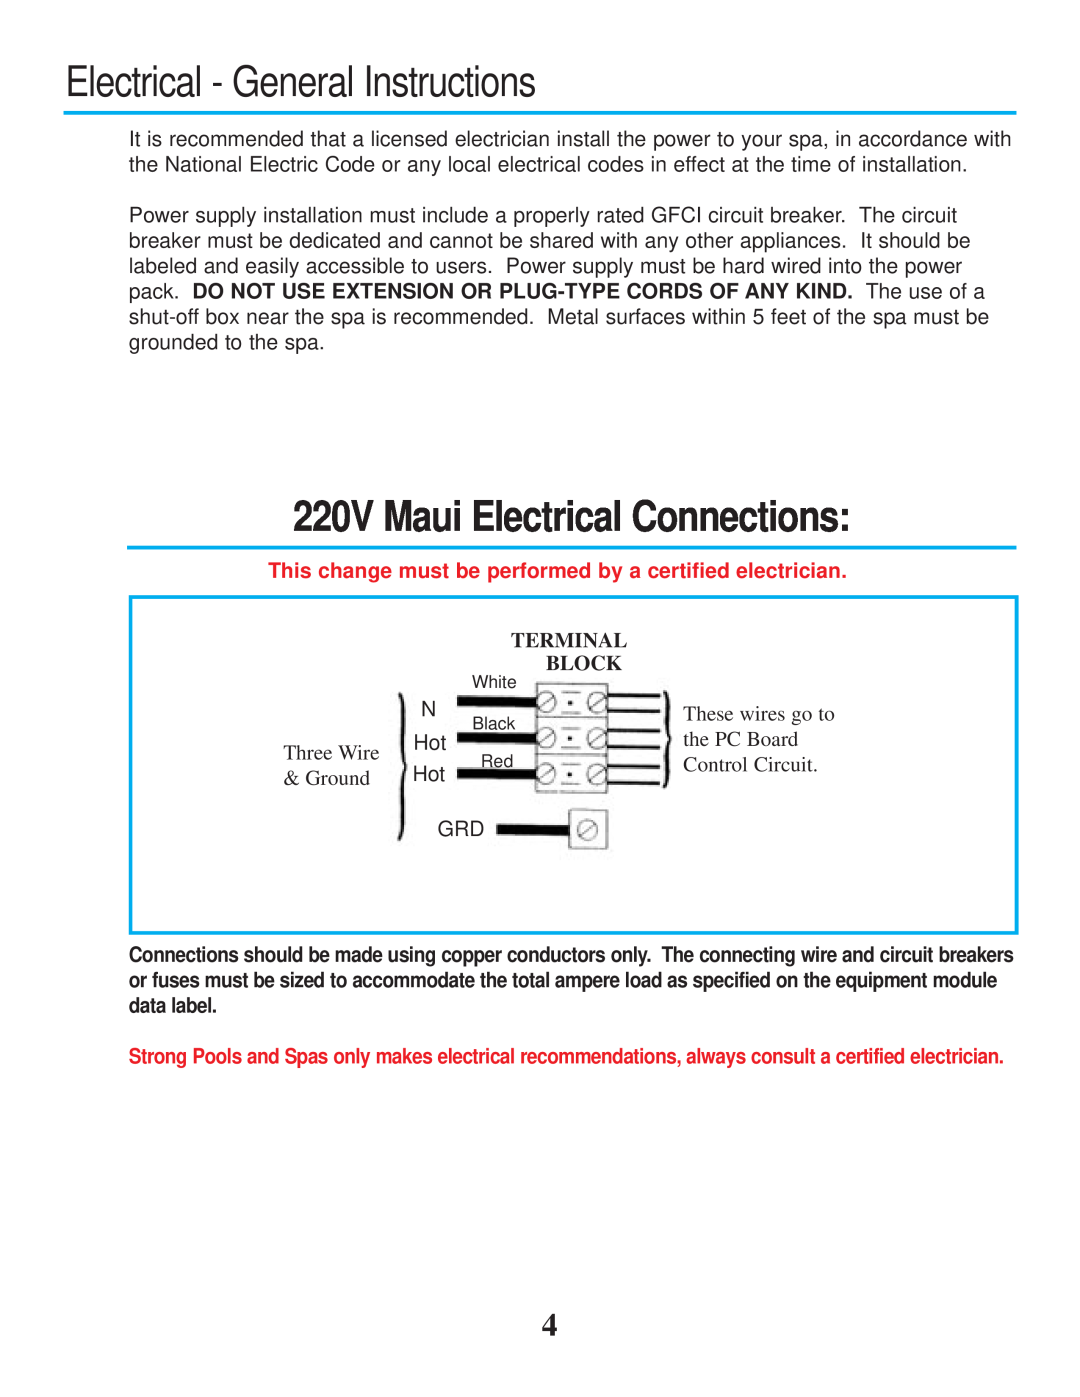 Strong Pools and Spas Maui Spa Electrical - General Instructions, 220V Maui Electrical Connections, Terminal Block, Ground 